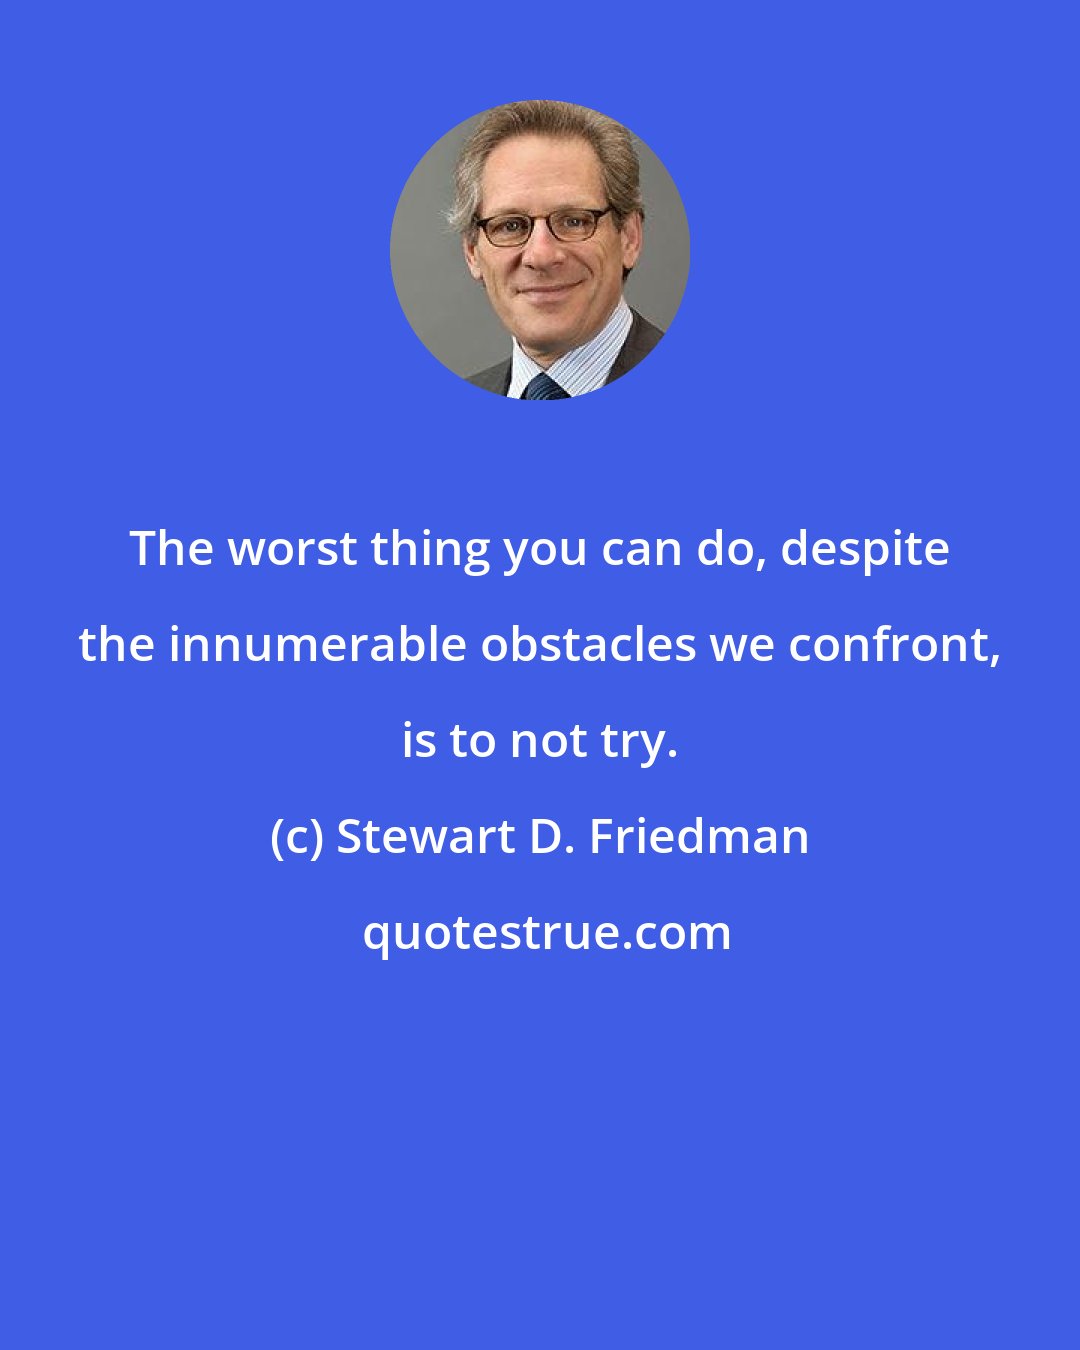 Stewart D. Friedman: The worst thing you can do, despite the innumerable obstacles we confront, is to not try.